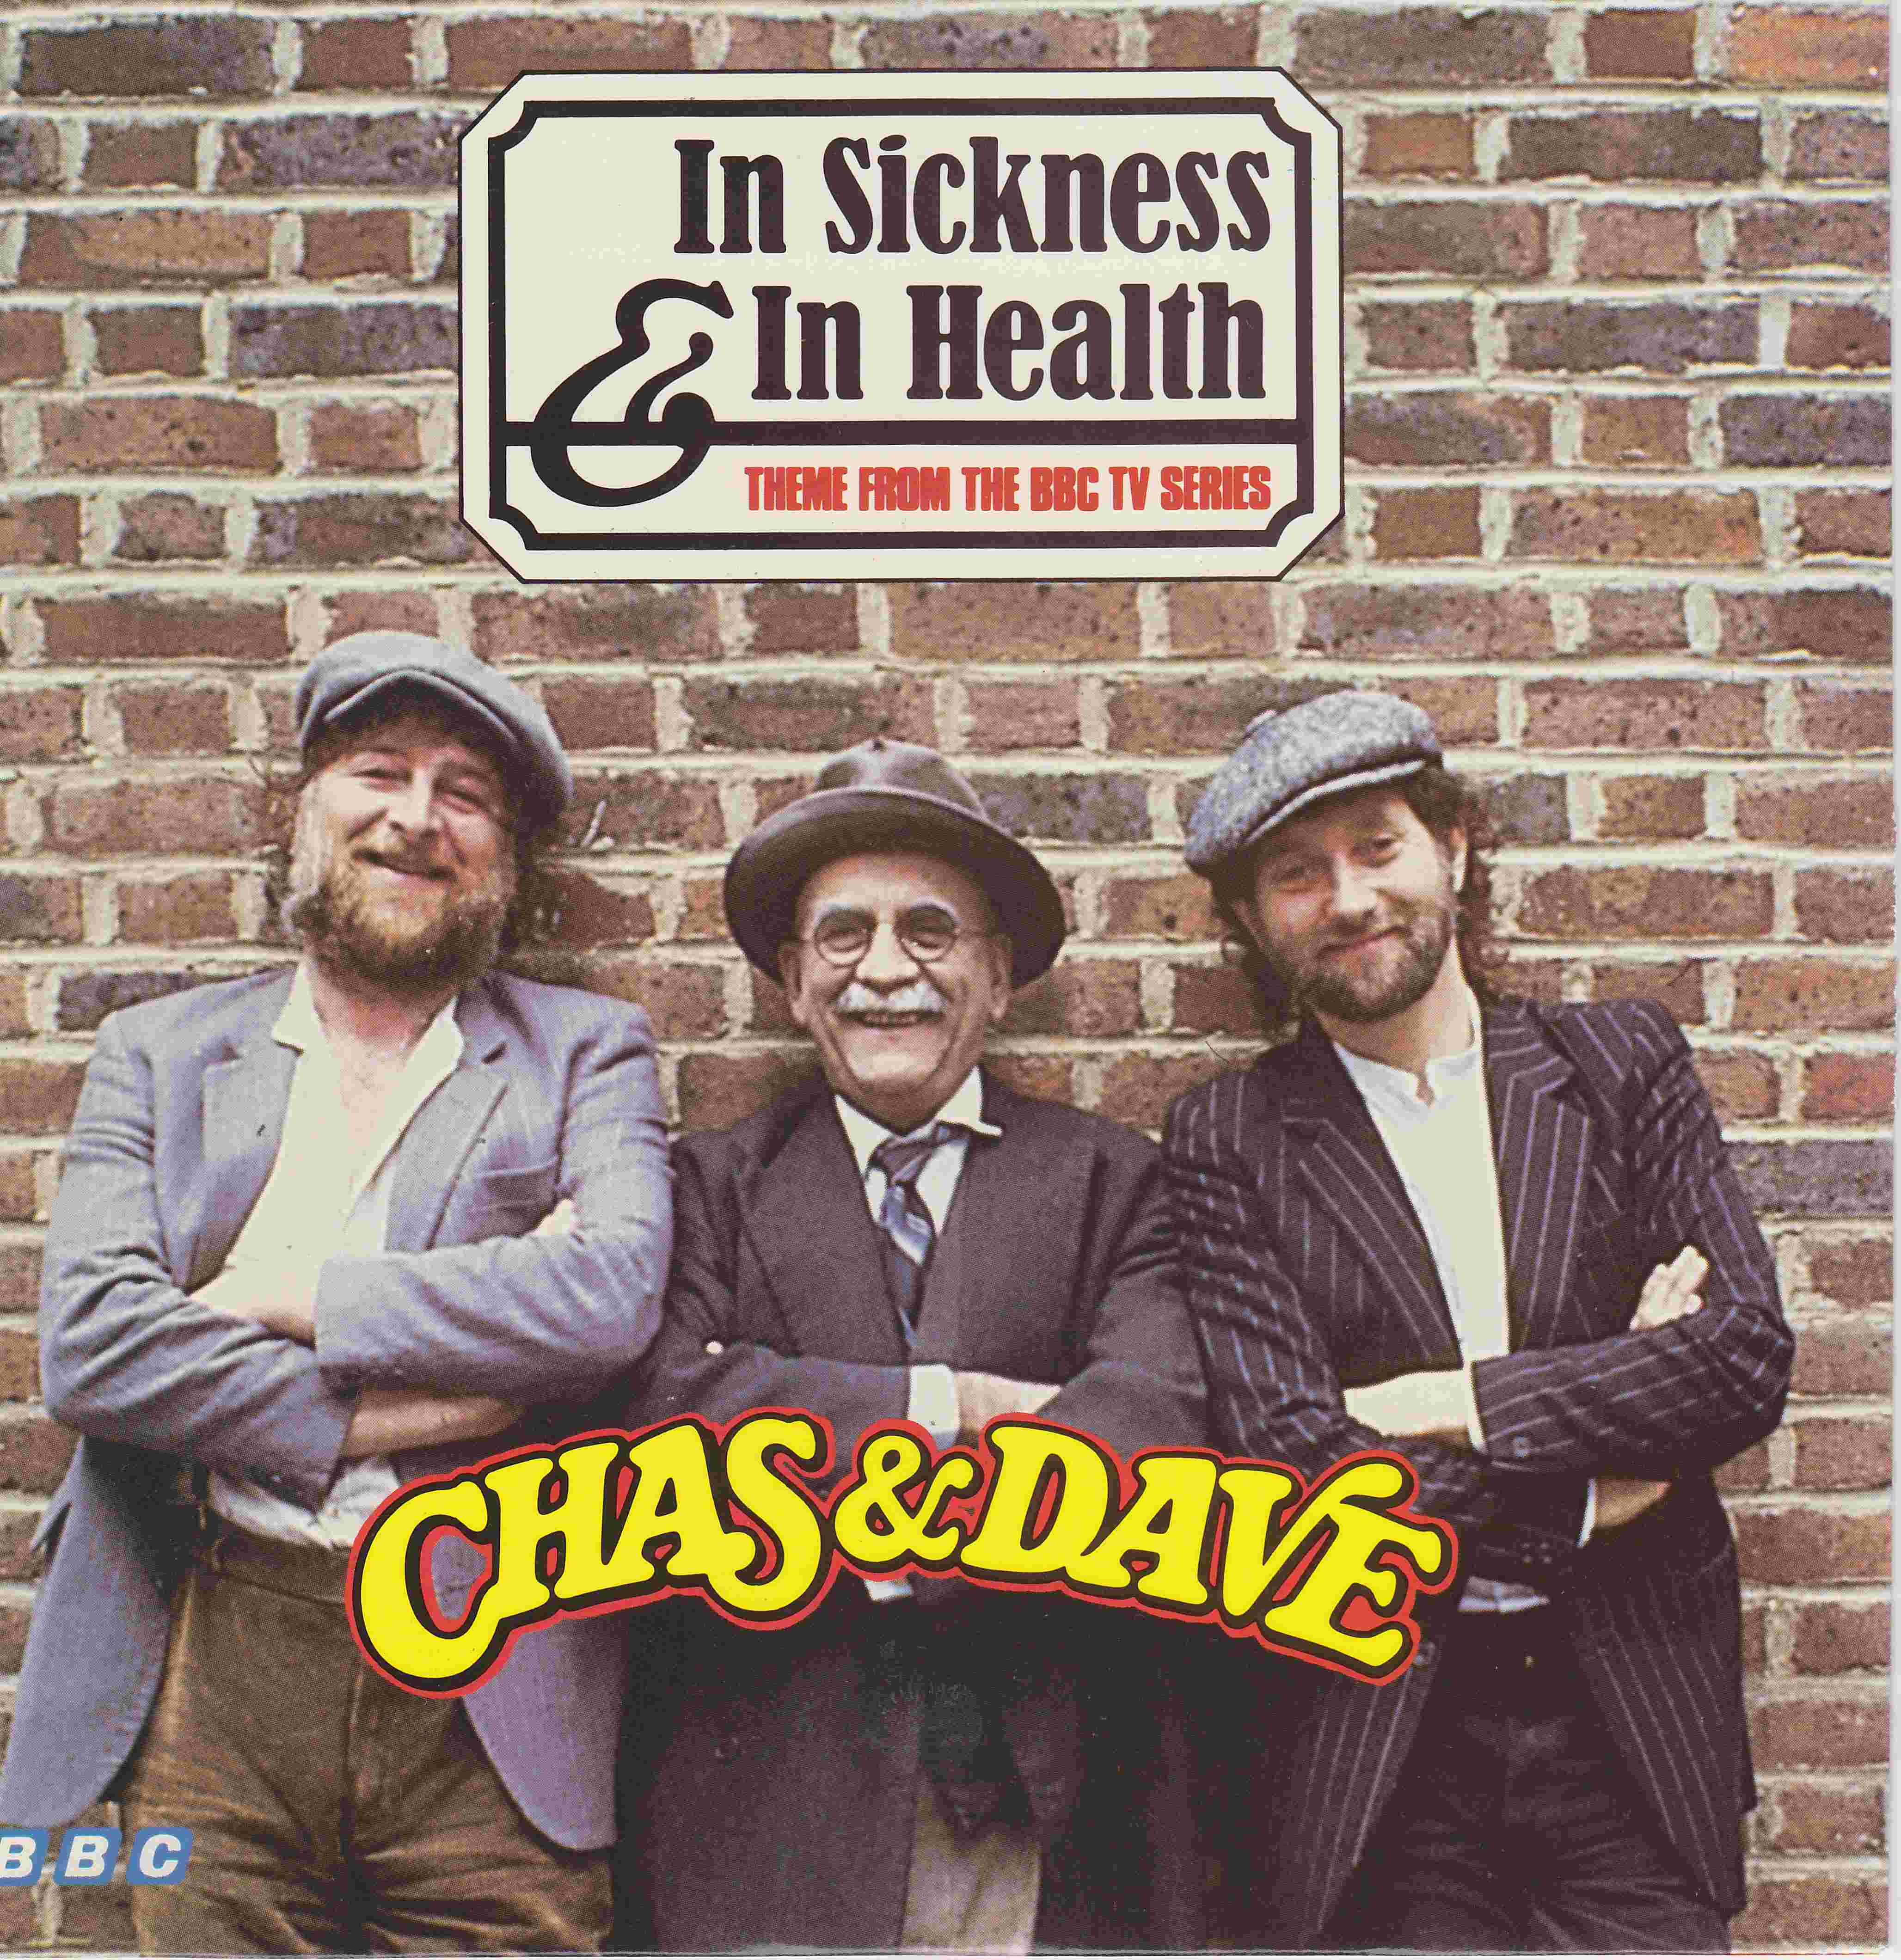 Picture of RESL 176 In sickness and in health by artist Chas 'n' Dave from the BBC singles - Records and Tapes library